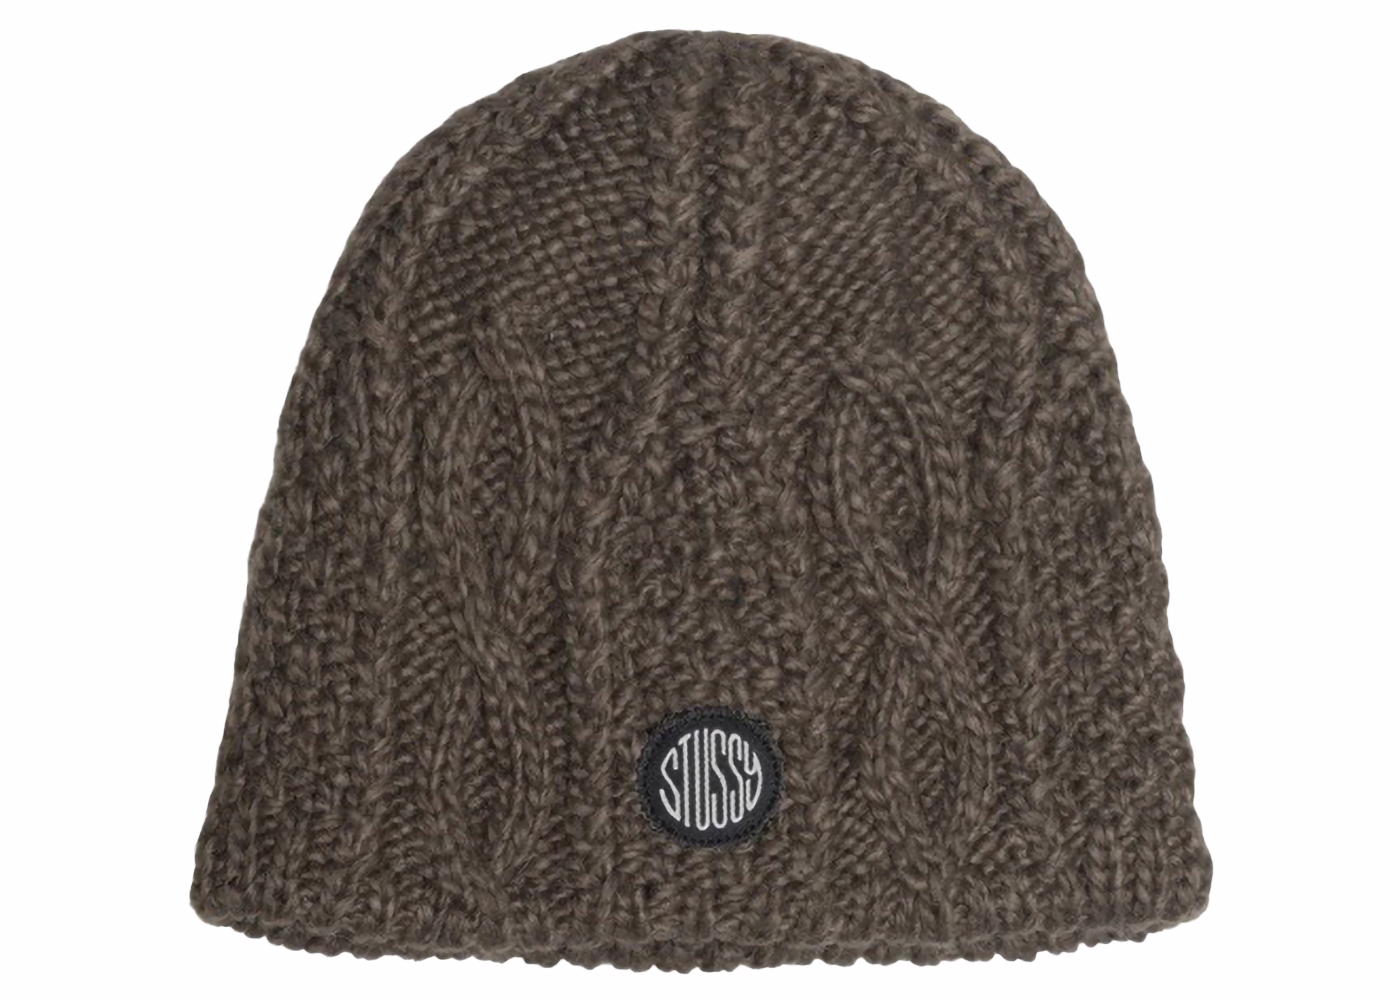 Stussy Skullcap Cable Knit Brown